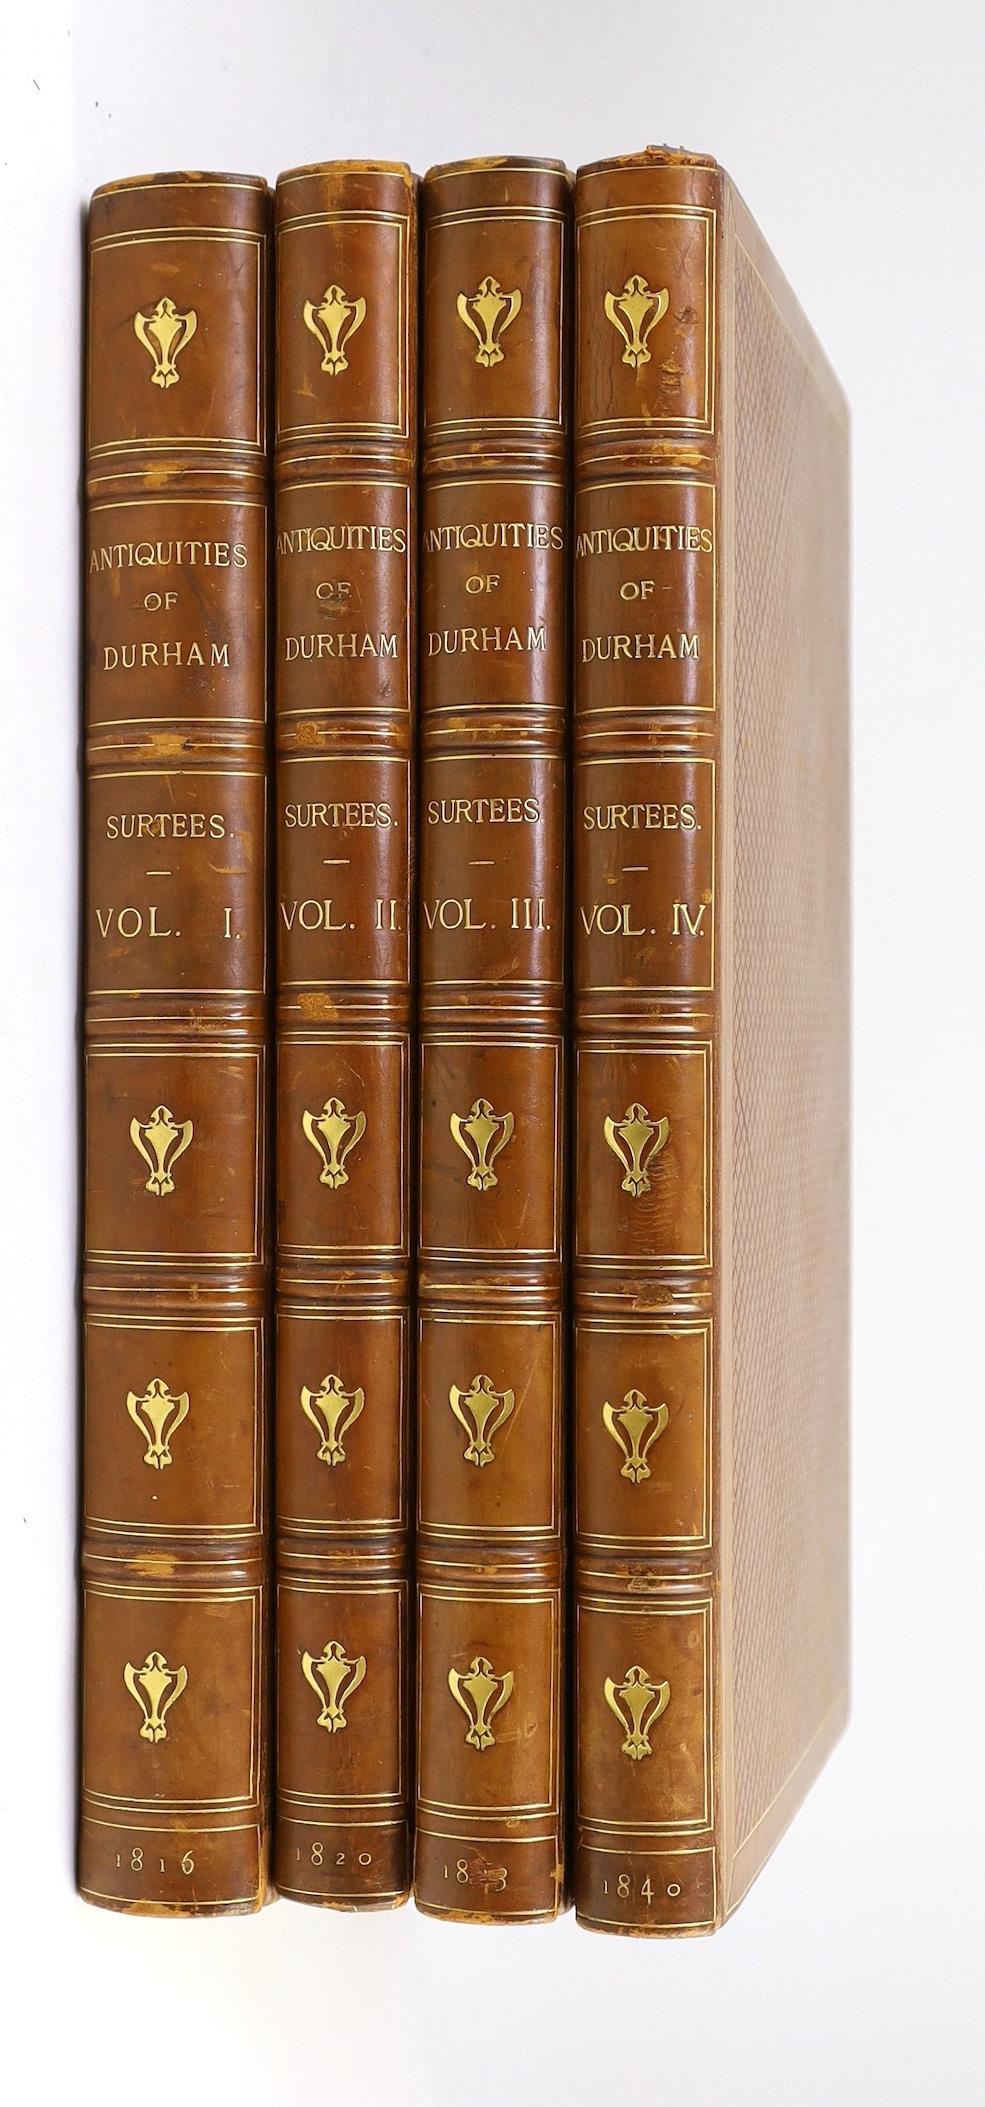 DURHAM - Surtees, Robert - The History and Antiquities of the County Palatine of Durham; compiled from the original records, preserved in public repositories and private collections, 1st edition, 4 vols, folio, diced cal